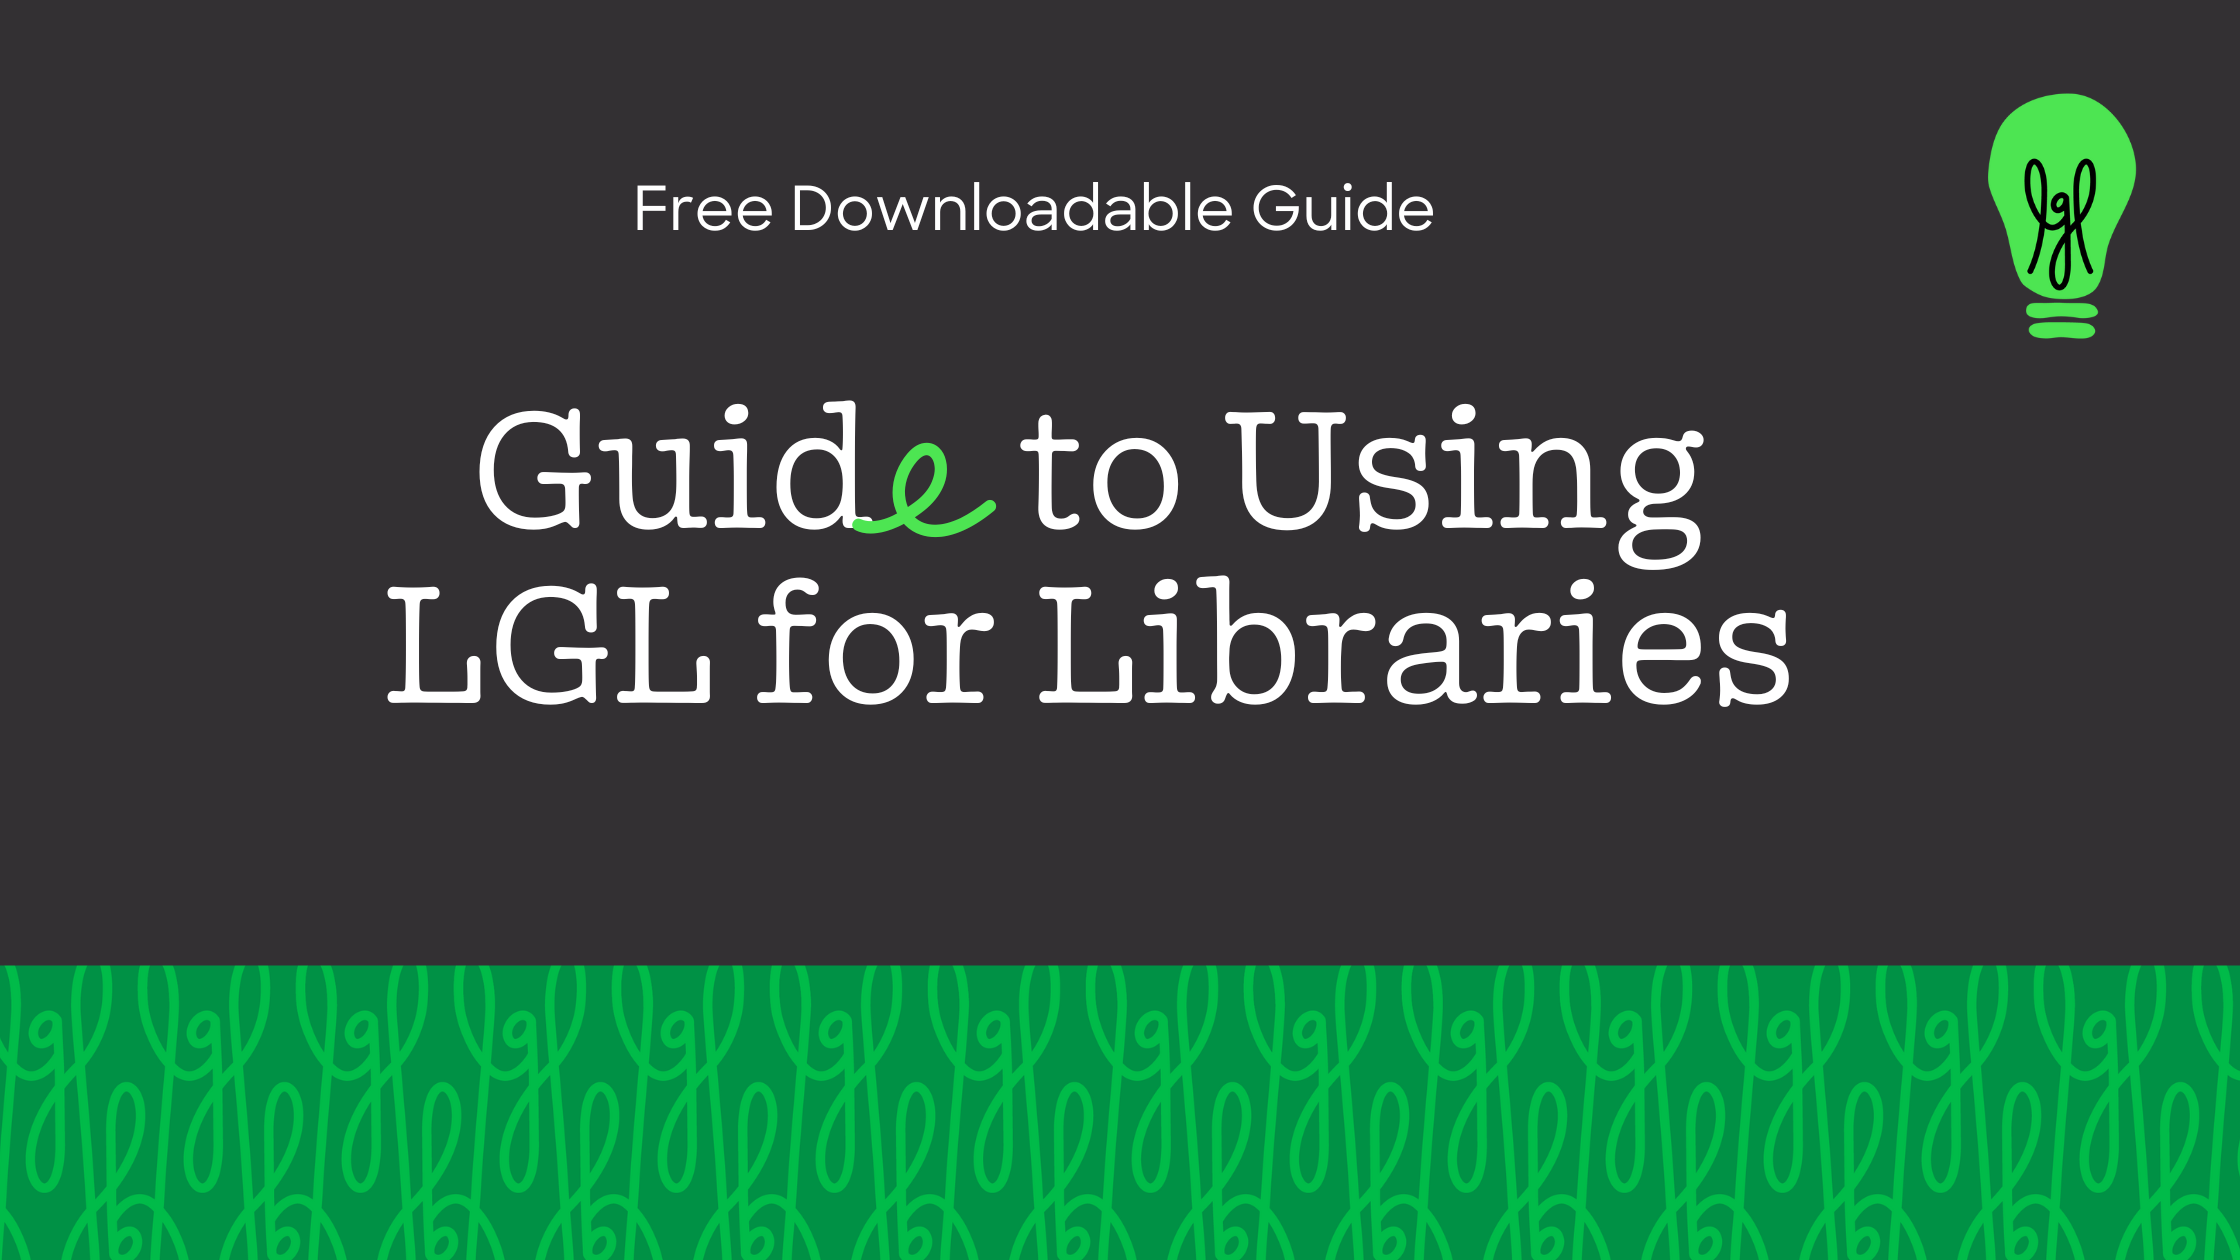 Free fundraising guide for Libraries